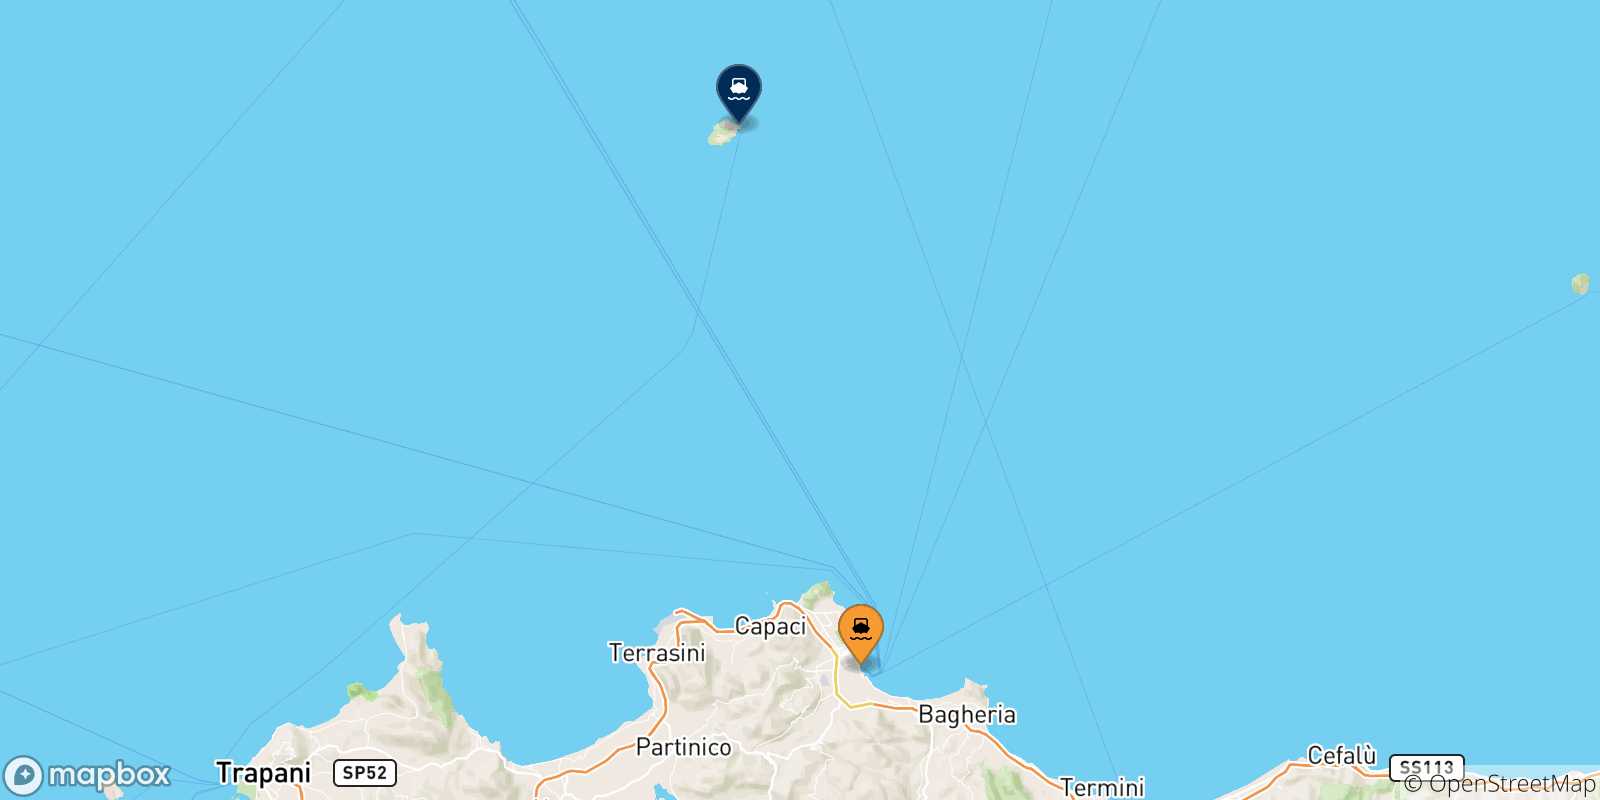 Map of the possible routes between Italy and Ustica